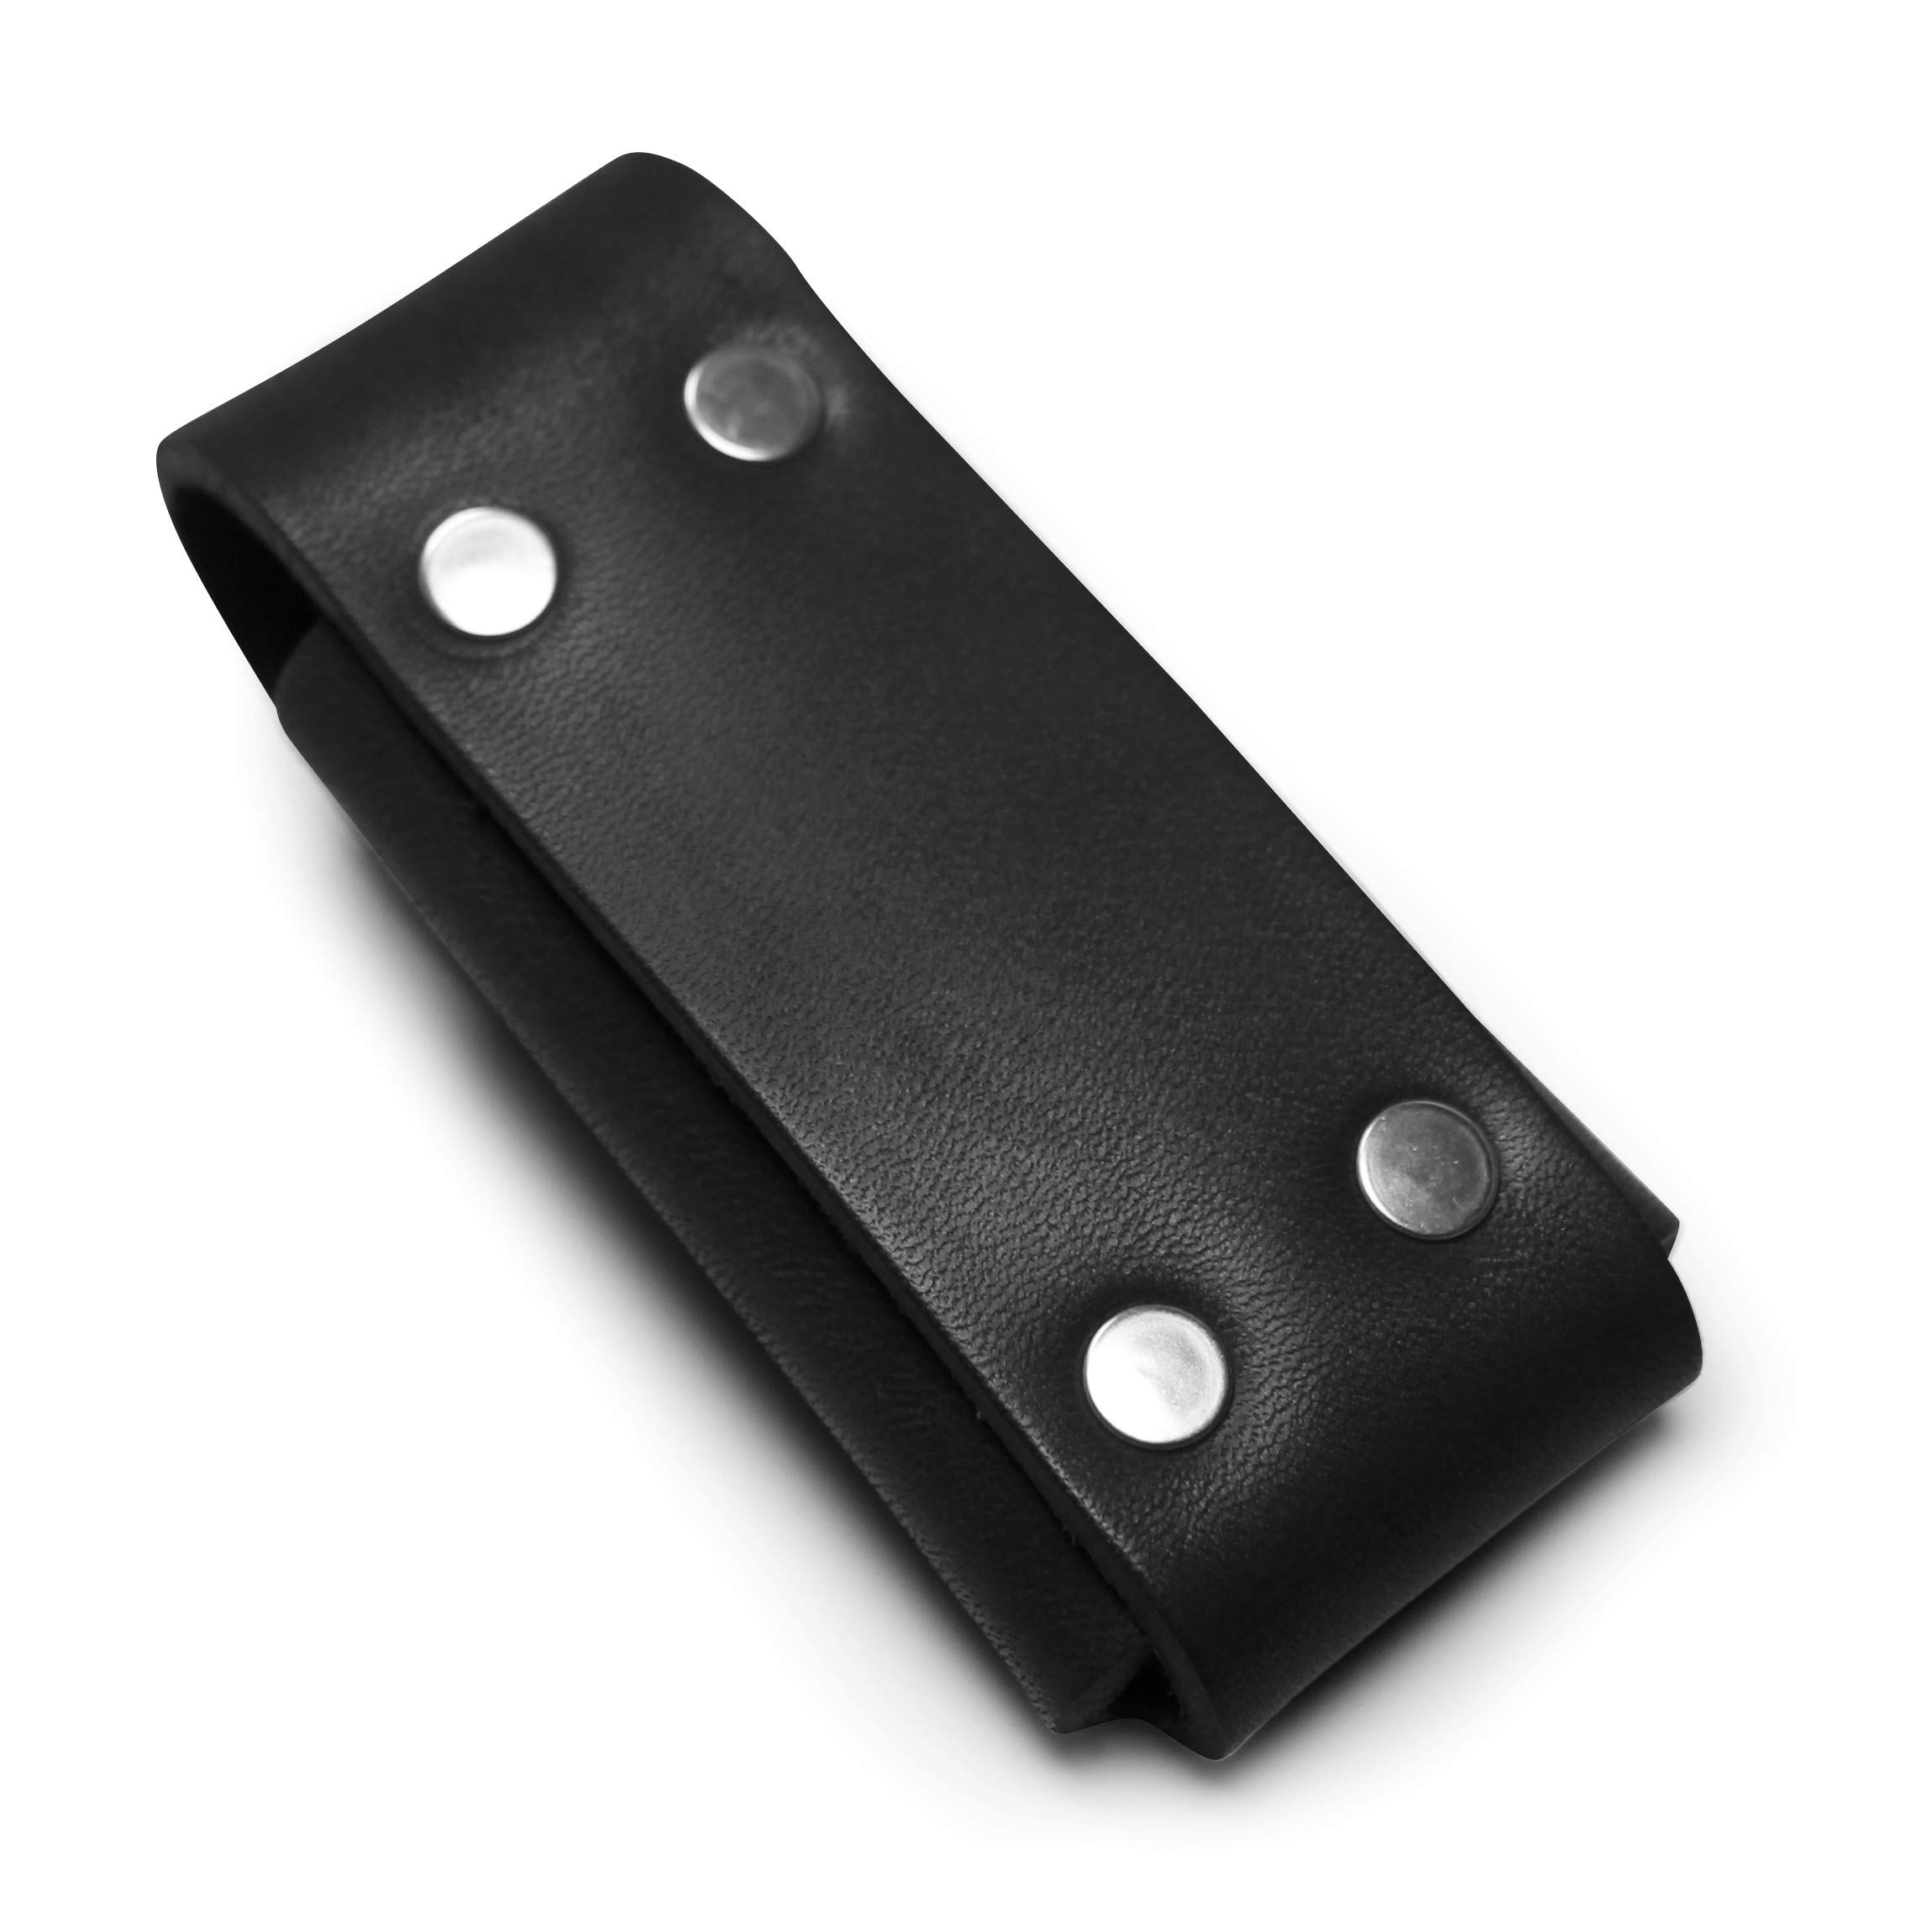 Leather Sheath for Gerber Suspension & Gerber Suspension NXT, Made in USA by American Bench Craft (Black)